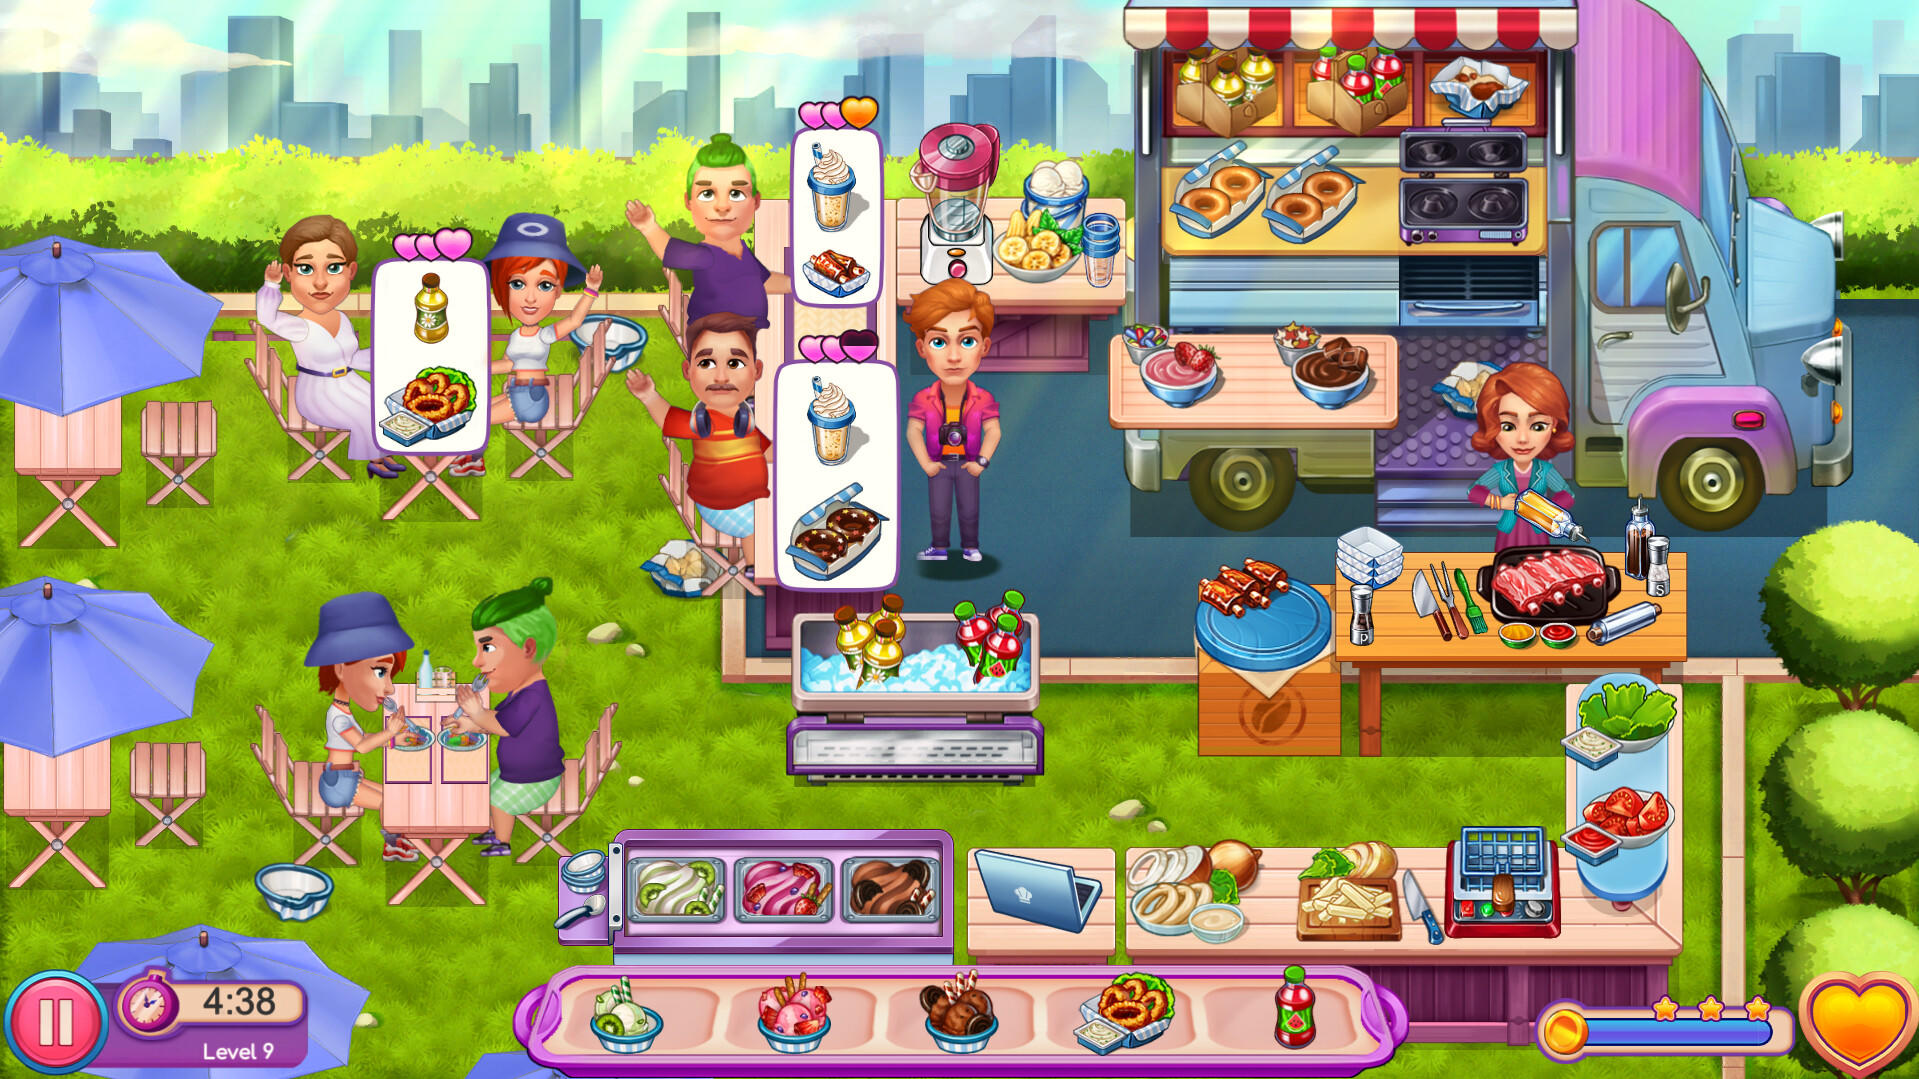 Screenshot 1 of Claire's Cruisin' Cafe: Fest Frenzy 